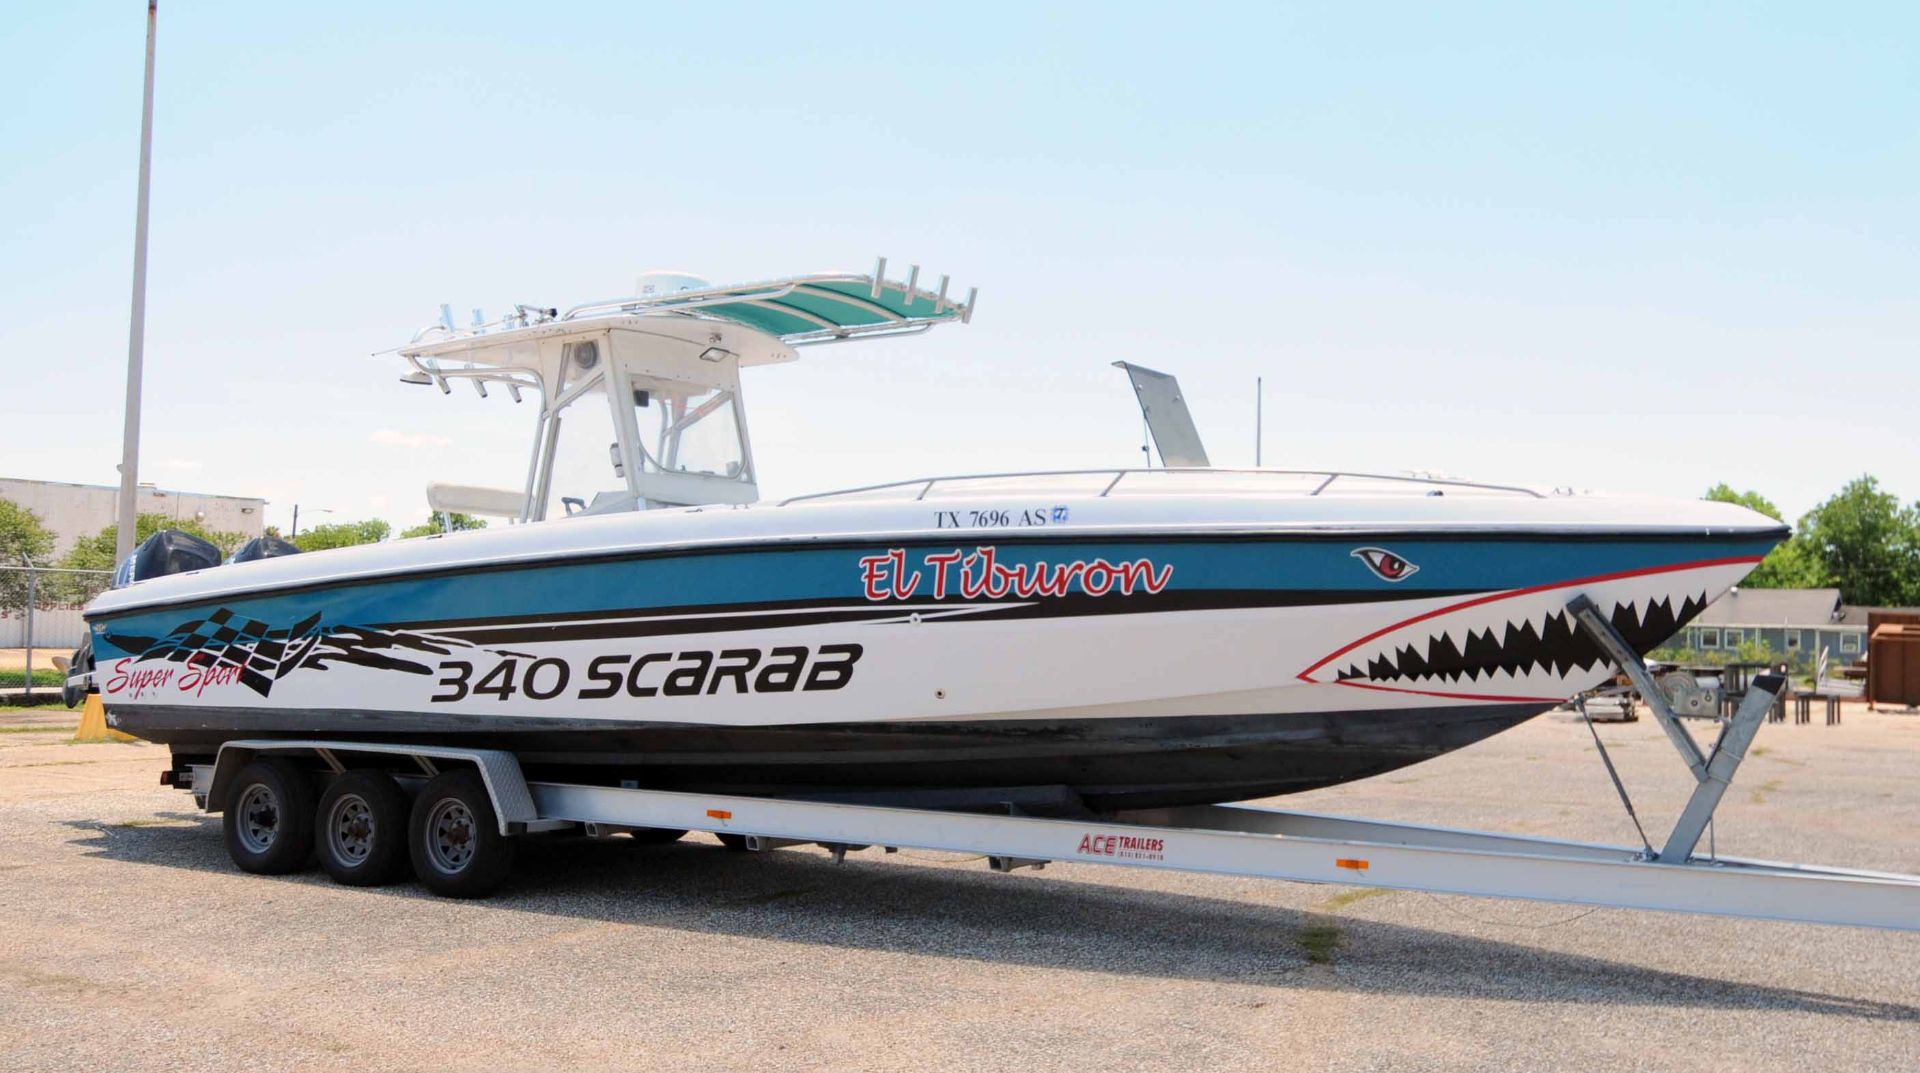 OFFSHORE BOAT, WELCRAFT SCARAB “SUPER SPORT” MDL. 340, 33'-10"L. center console, twin 2005 Mercury